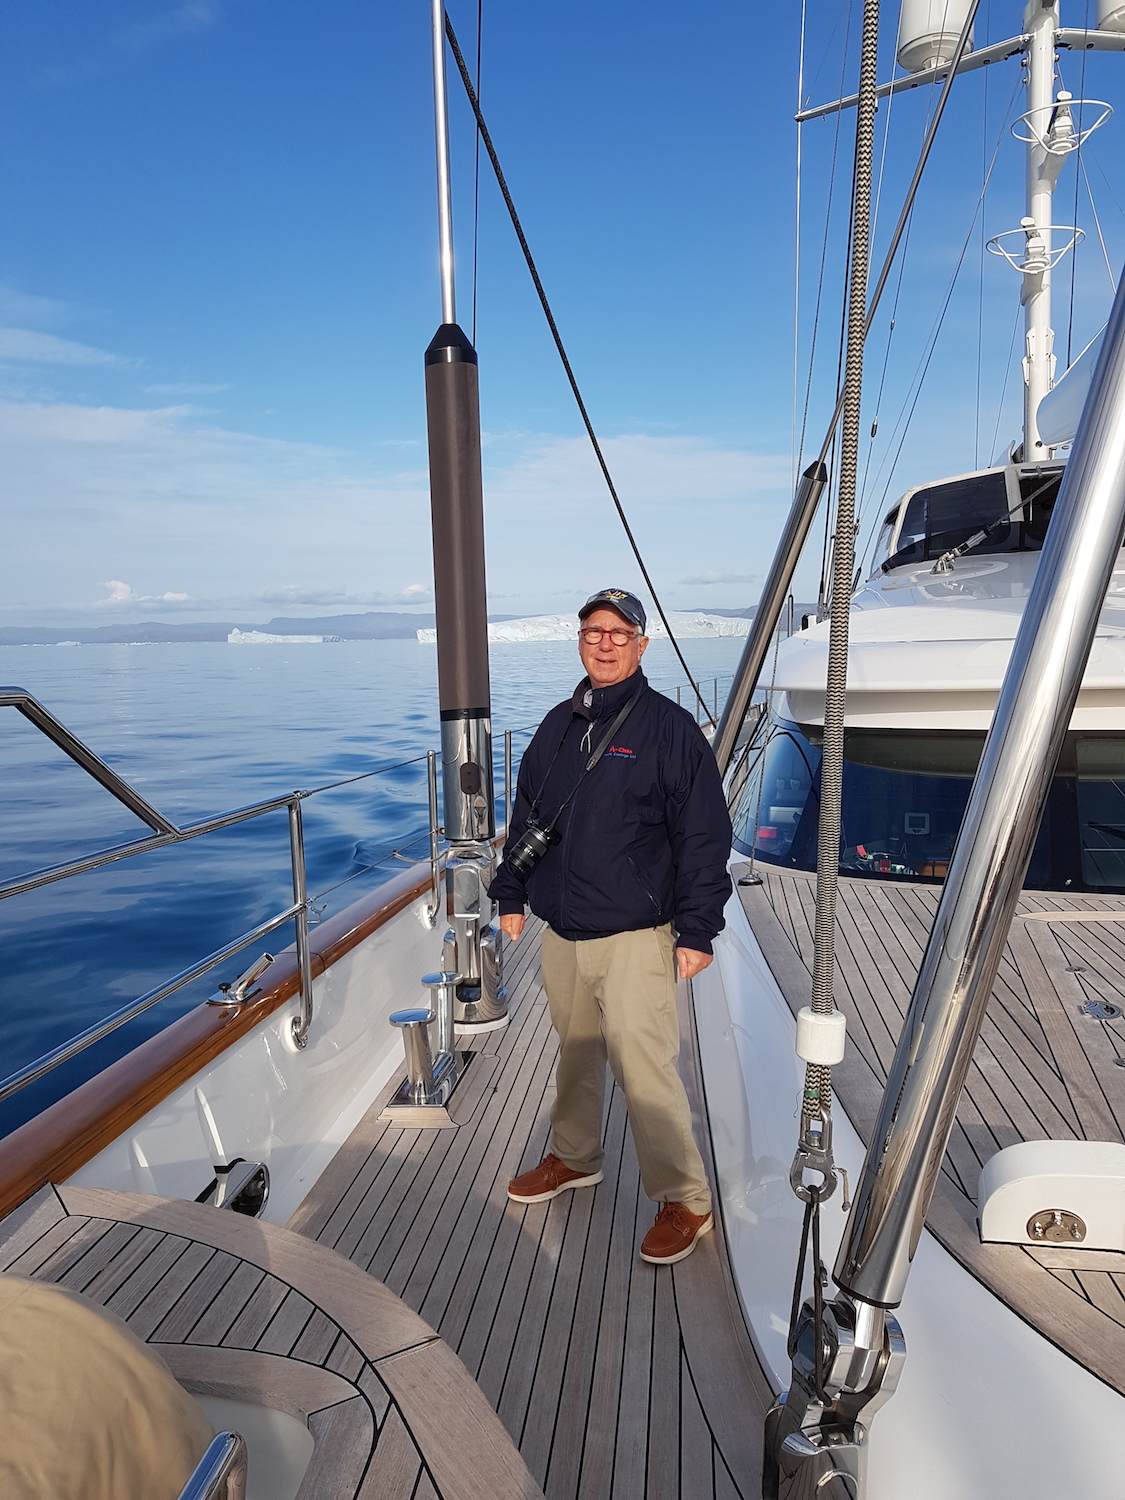 Ron Holland on deck of sailing yacht Rosehearty while cruising the Northwest Passage summer 2019